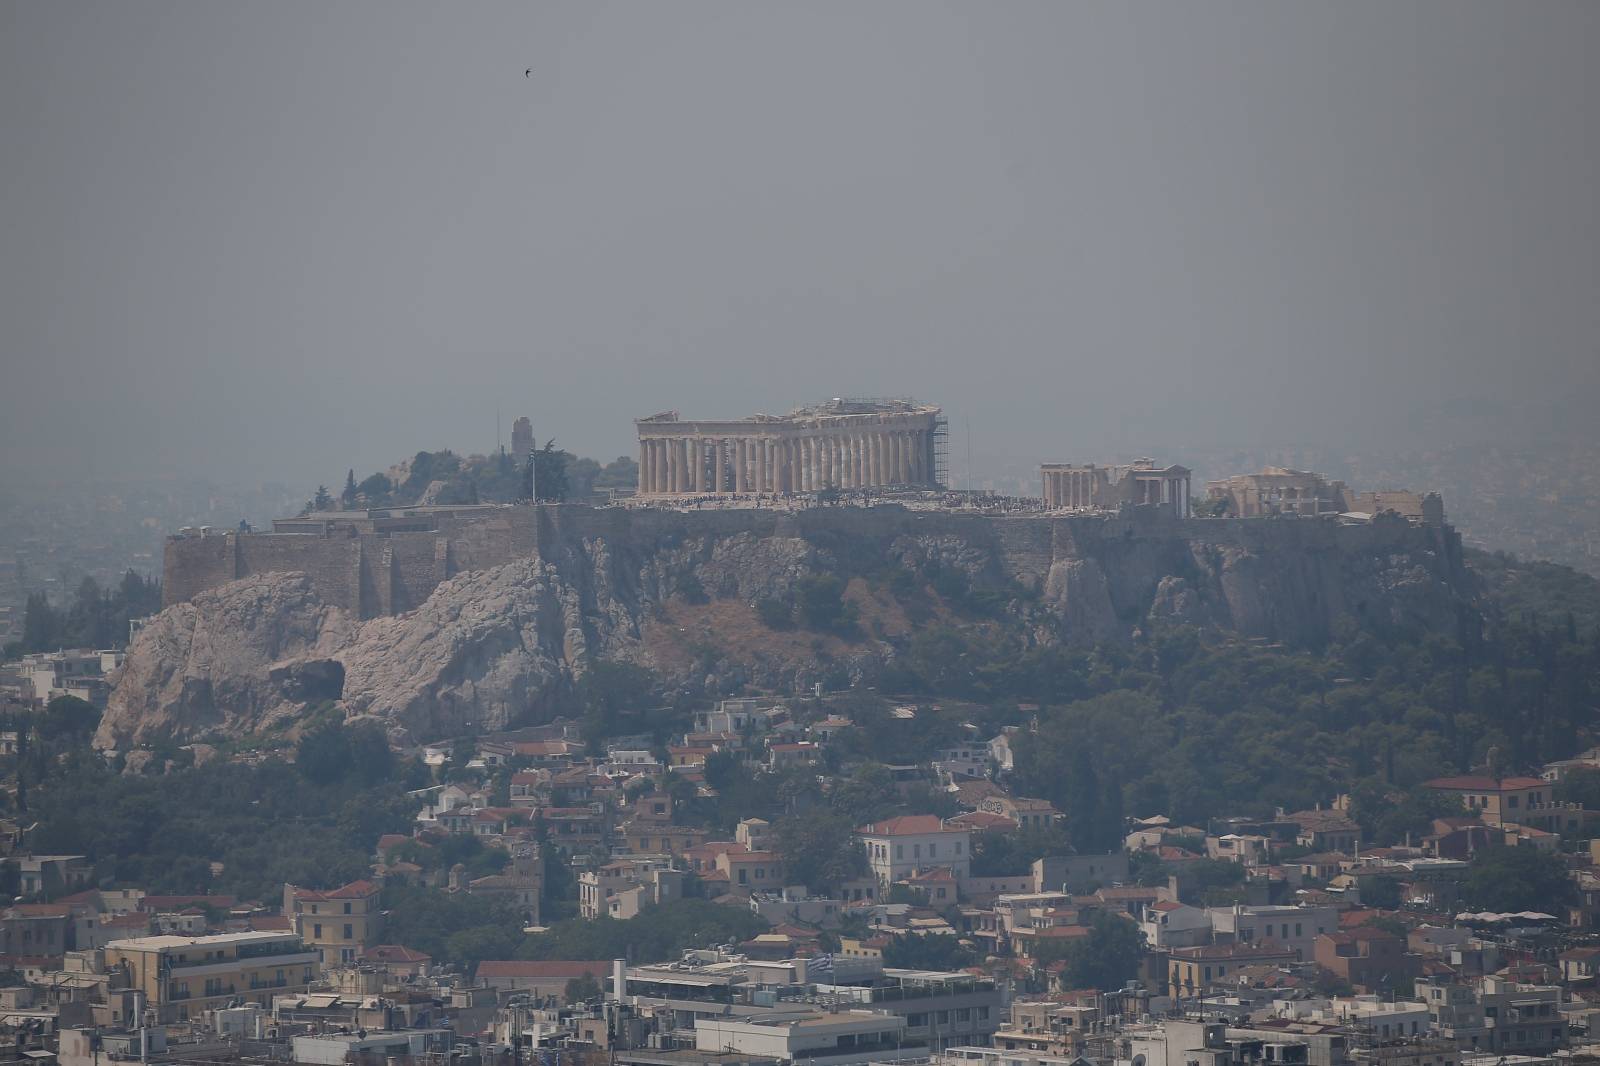 Acropolis hill with the Parthenon temple is covered with smoke from a wildfire burning the Island of Evia. in Athens